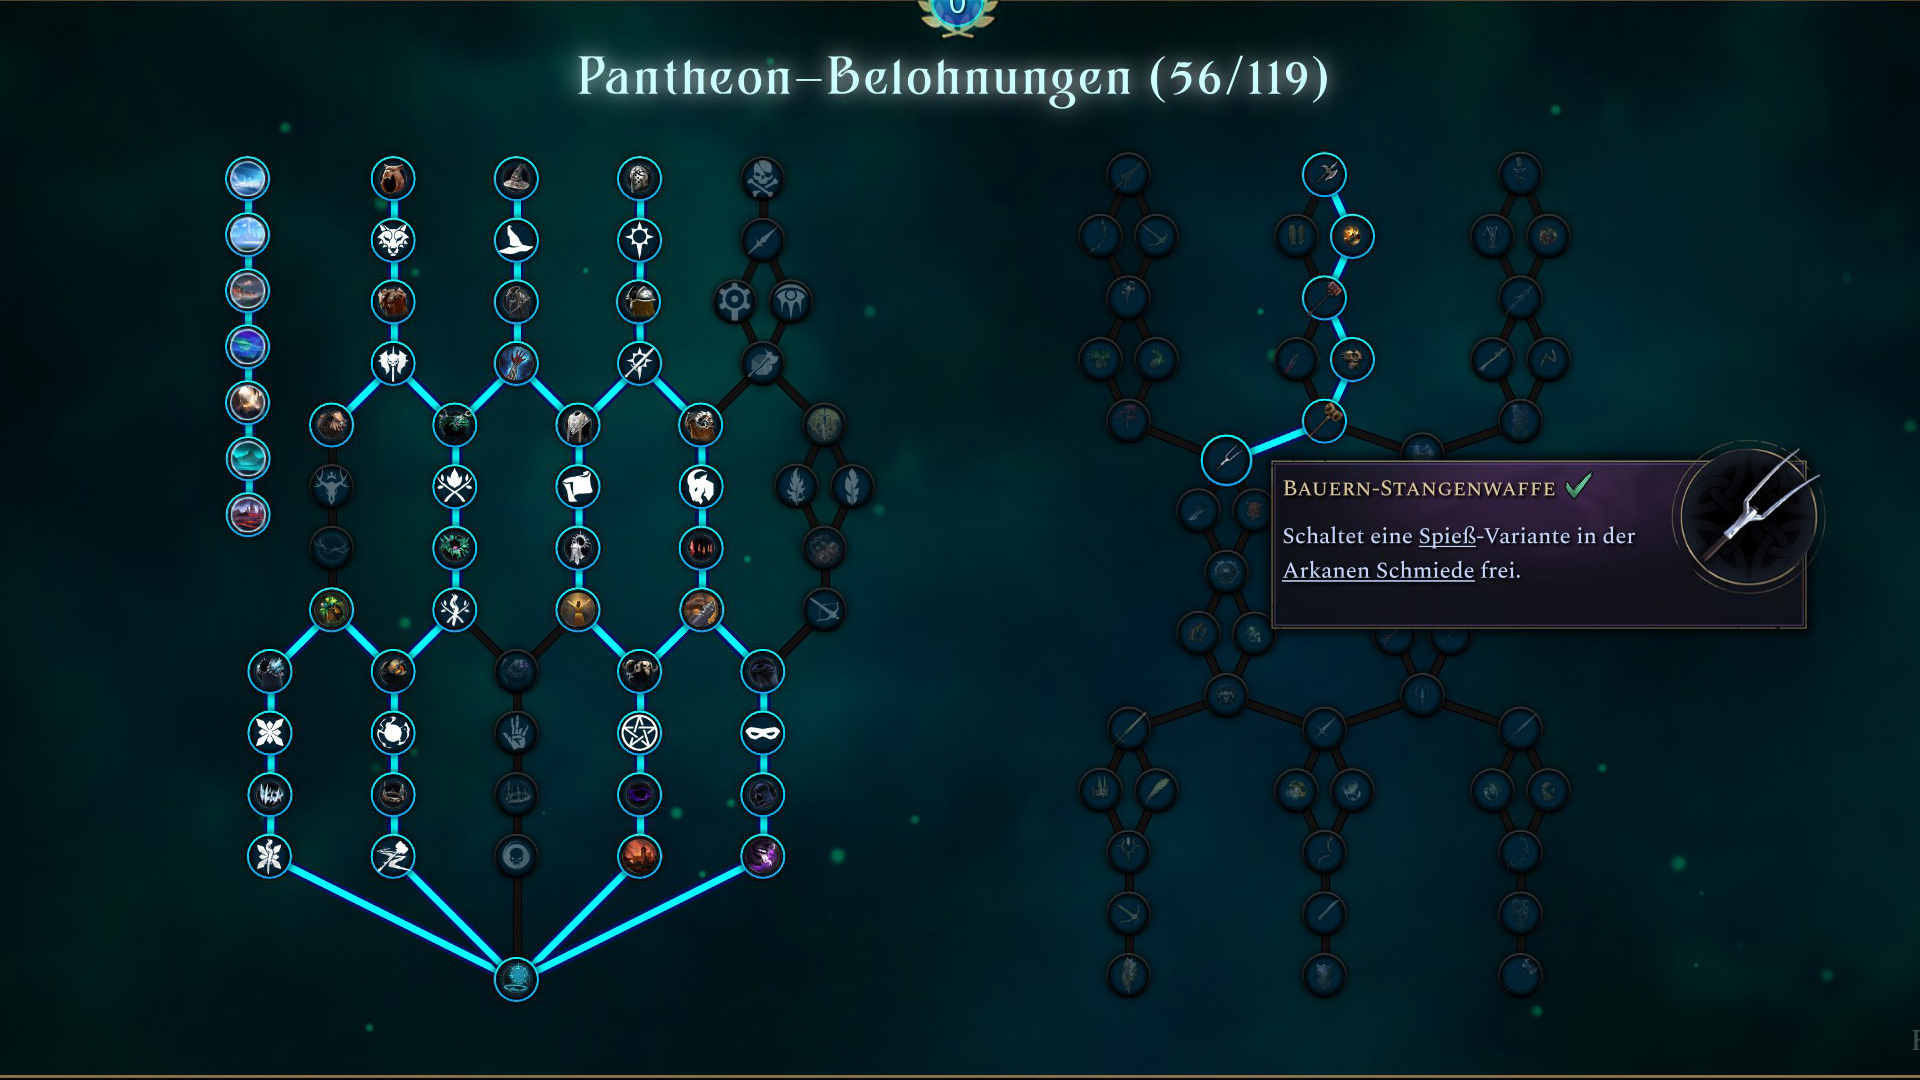 Pantheon rewards are available for players who like to experiment